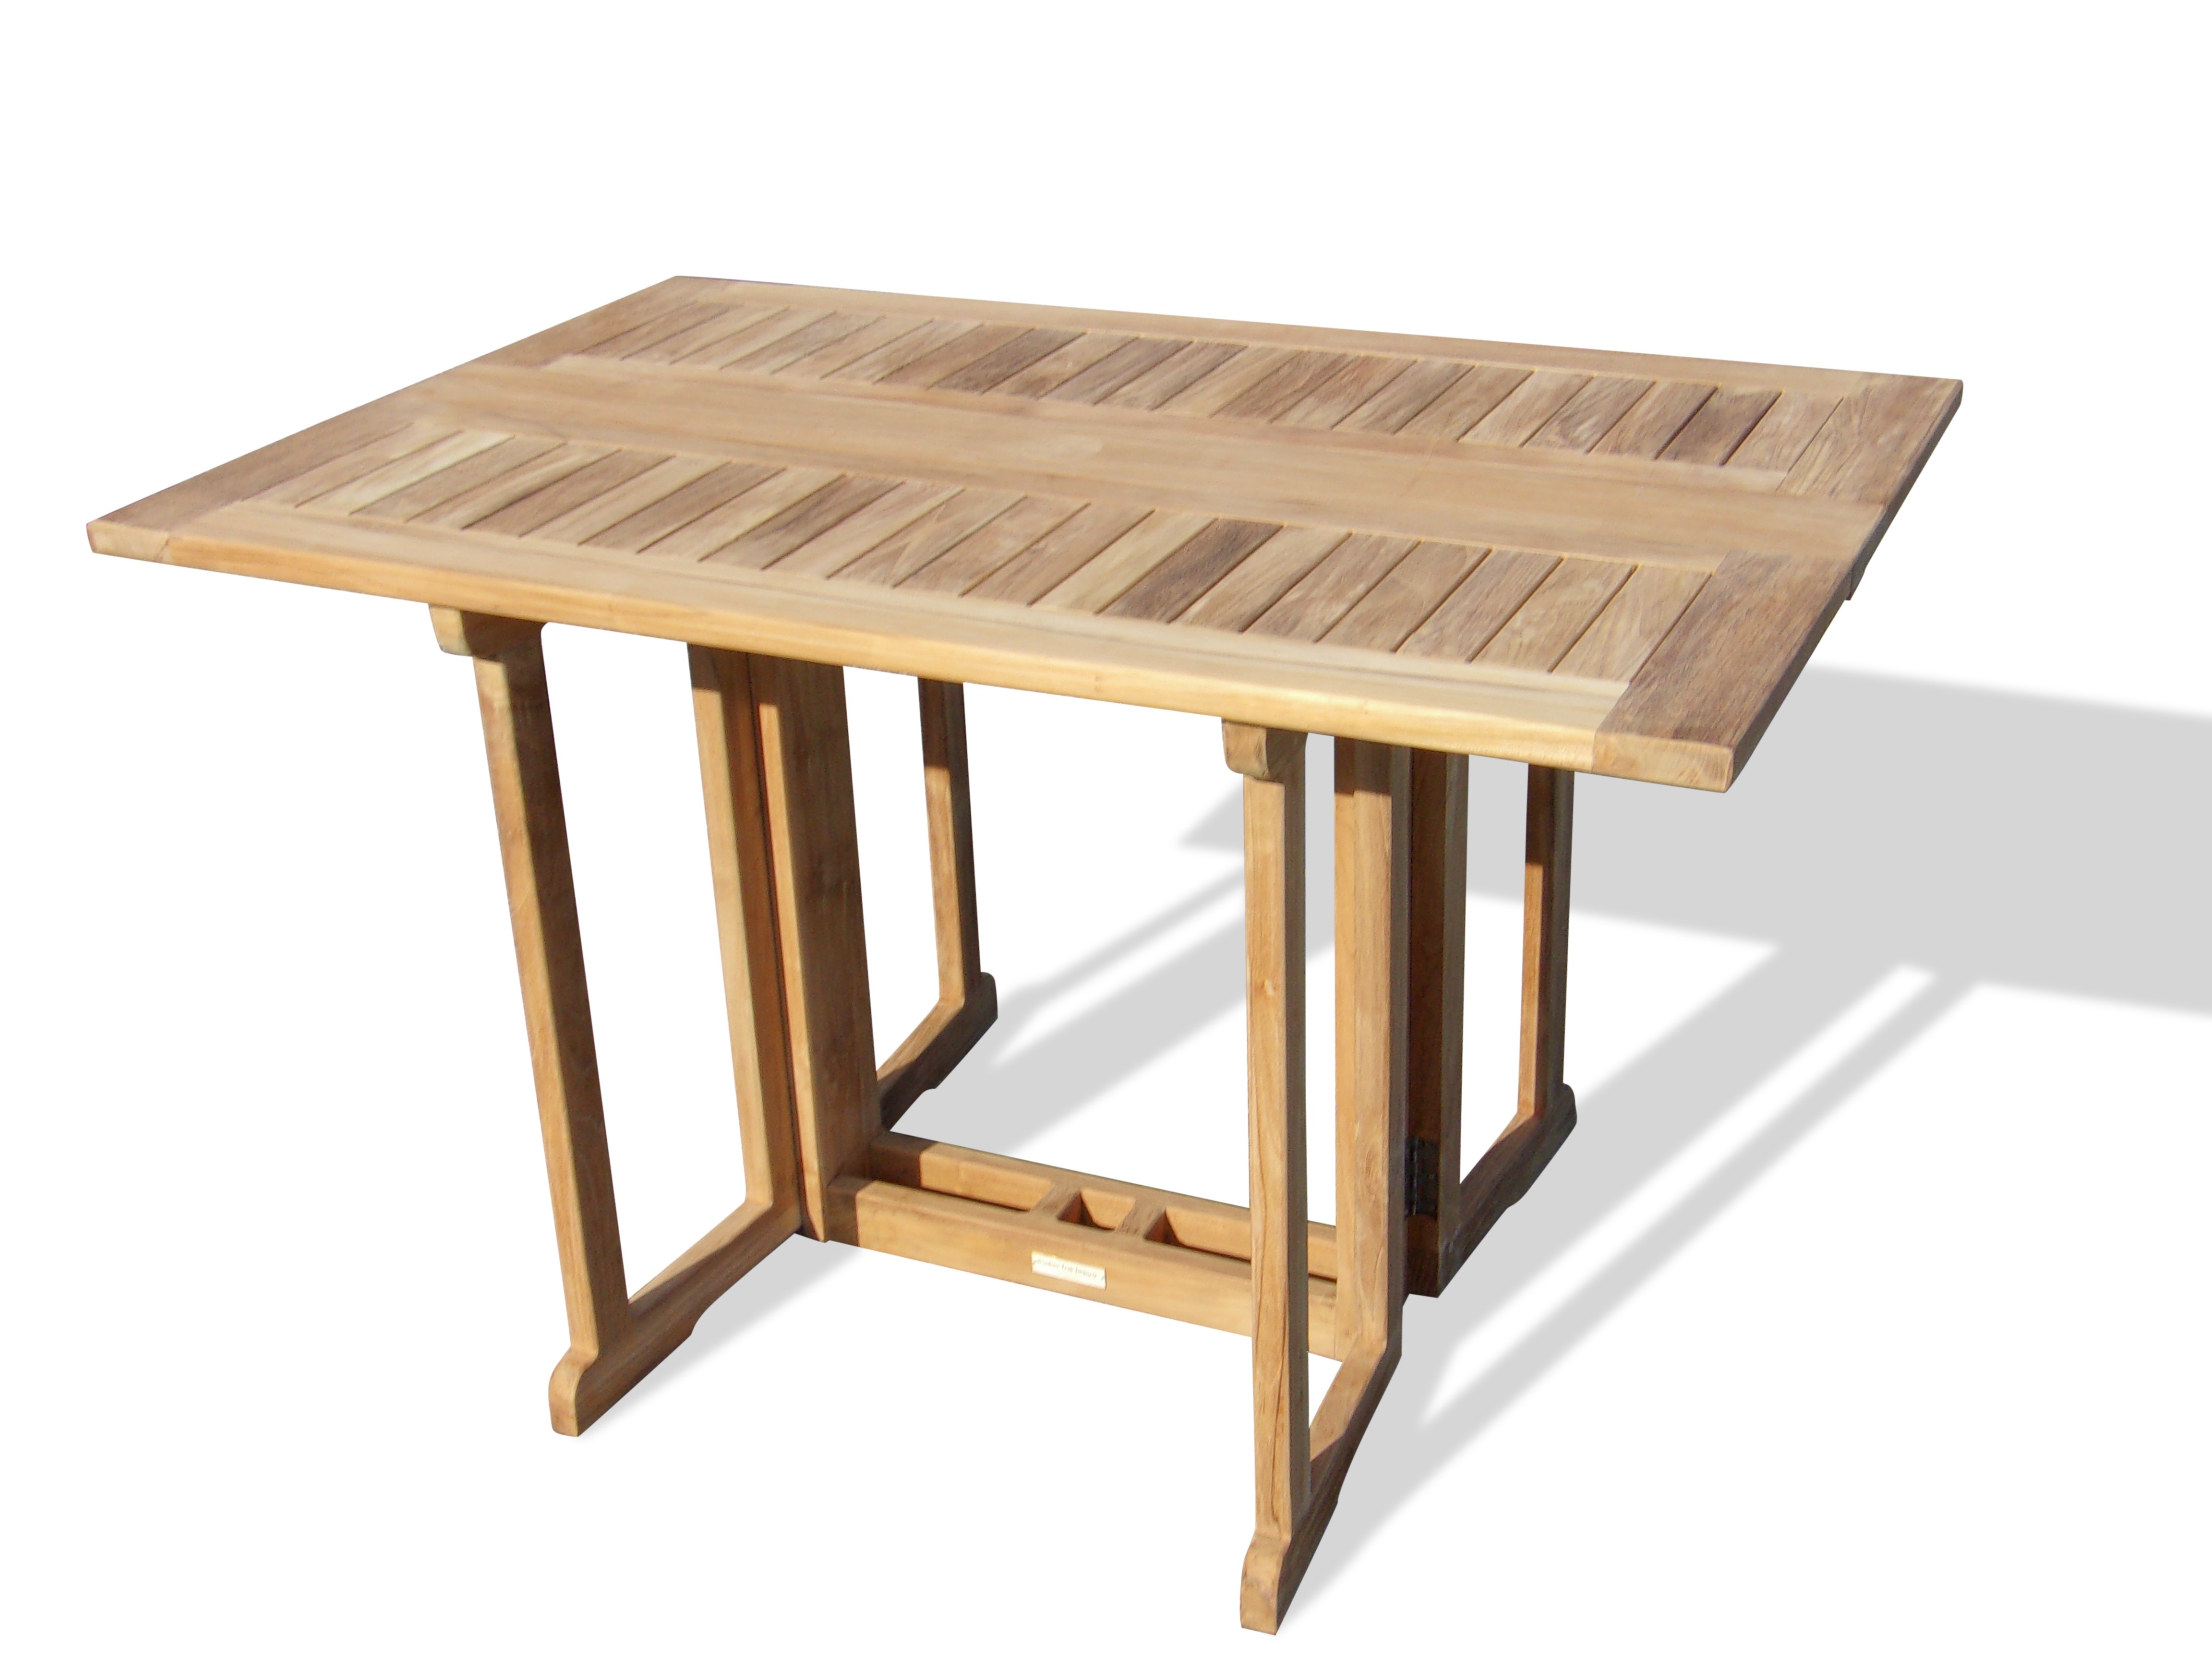 Barcelone 48" x 31" Rectangular Teak Drop Leaf Folding Dining Table...use with 1 Leaf Up or 2.... Makes 2 different tables 